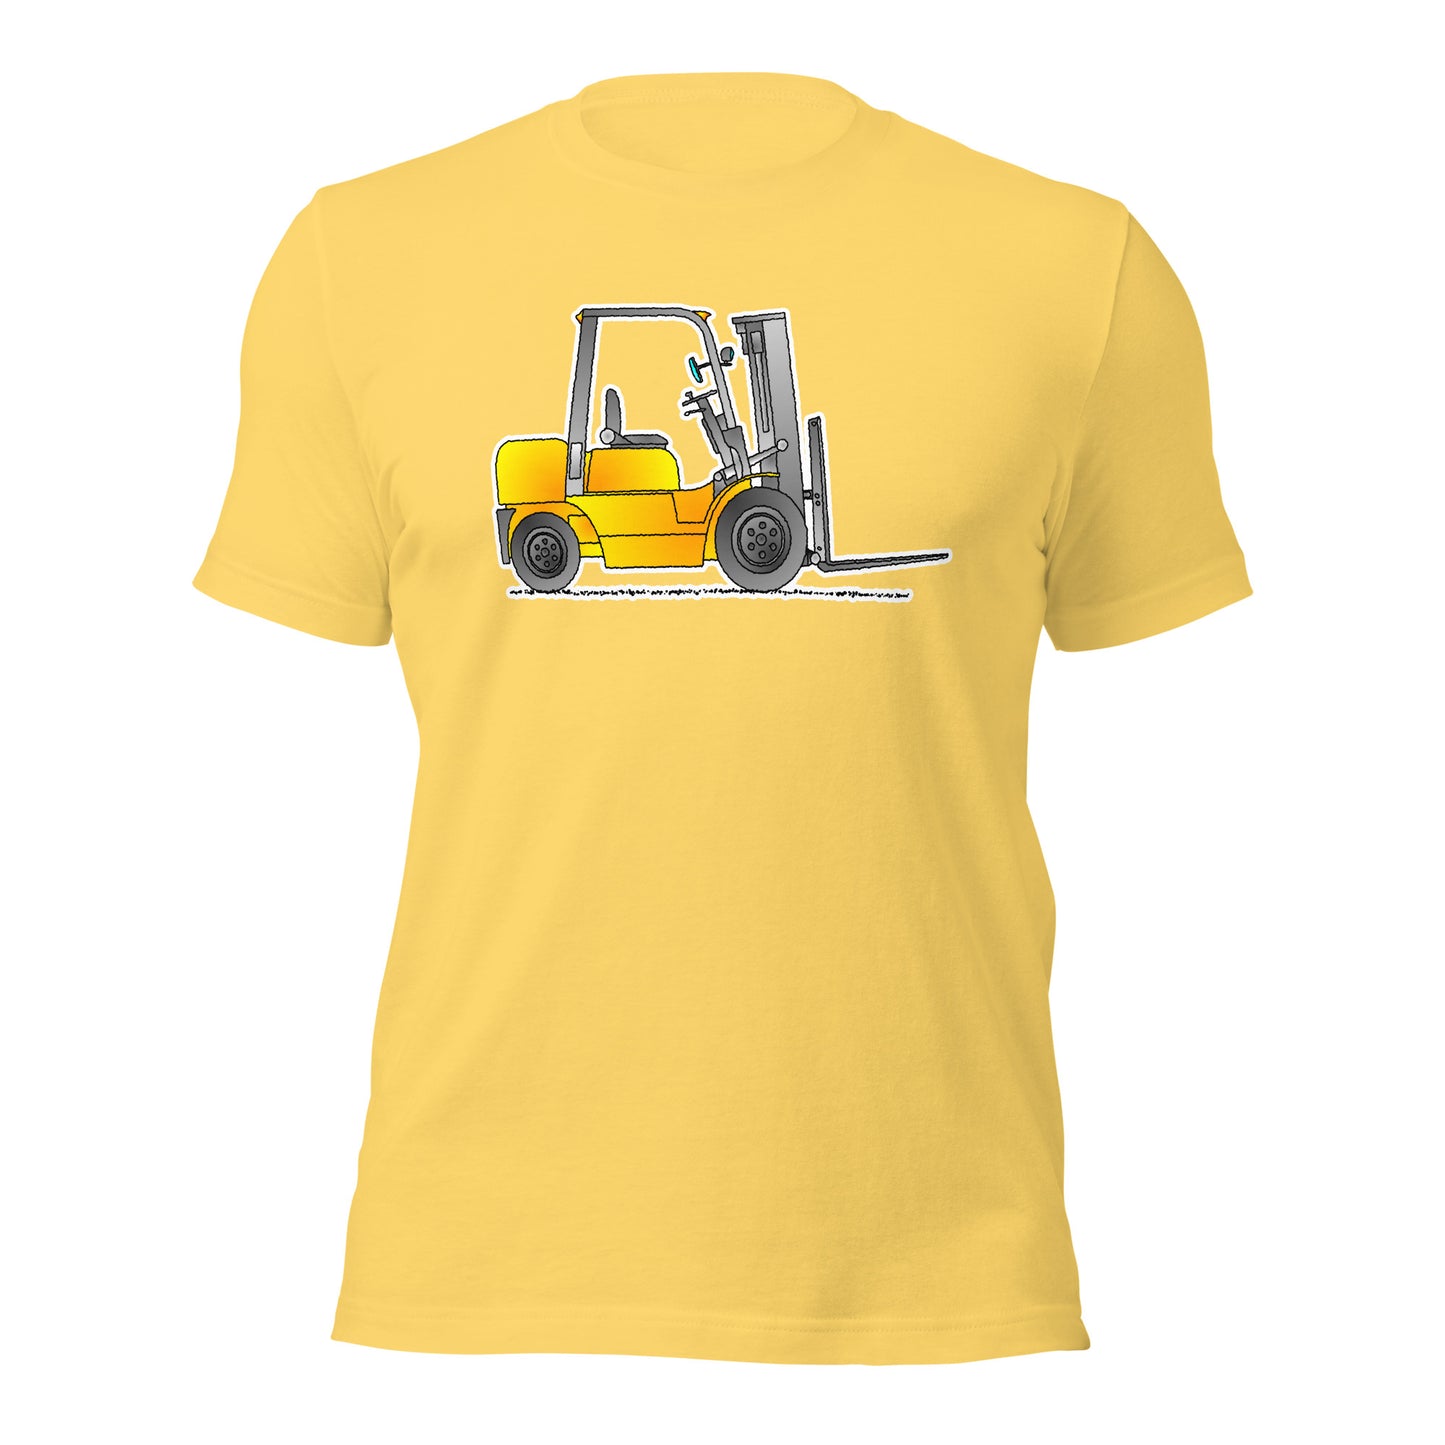 Forklift Truck T-Shirt, Adult AT008